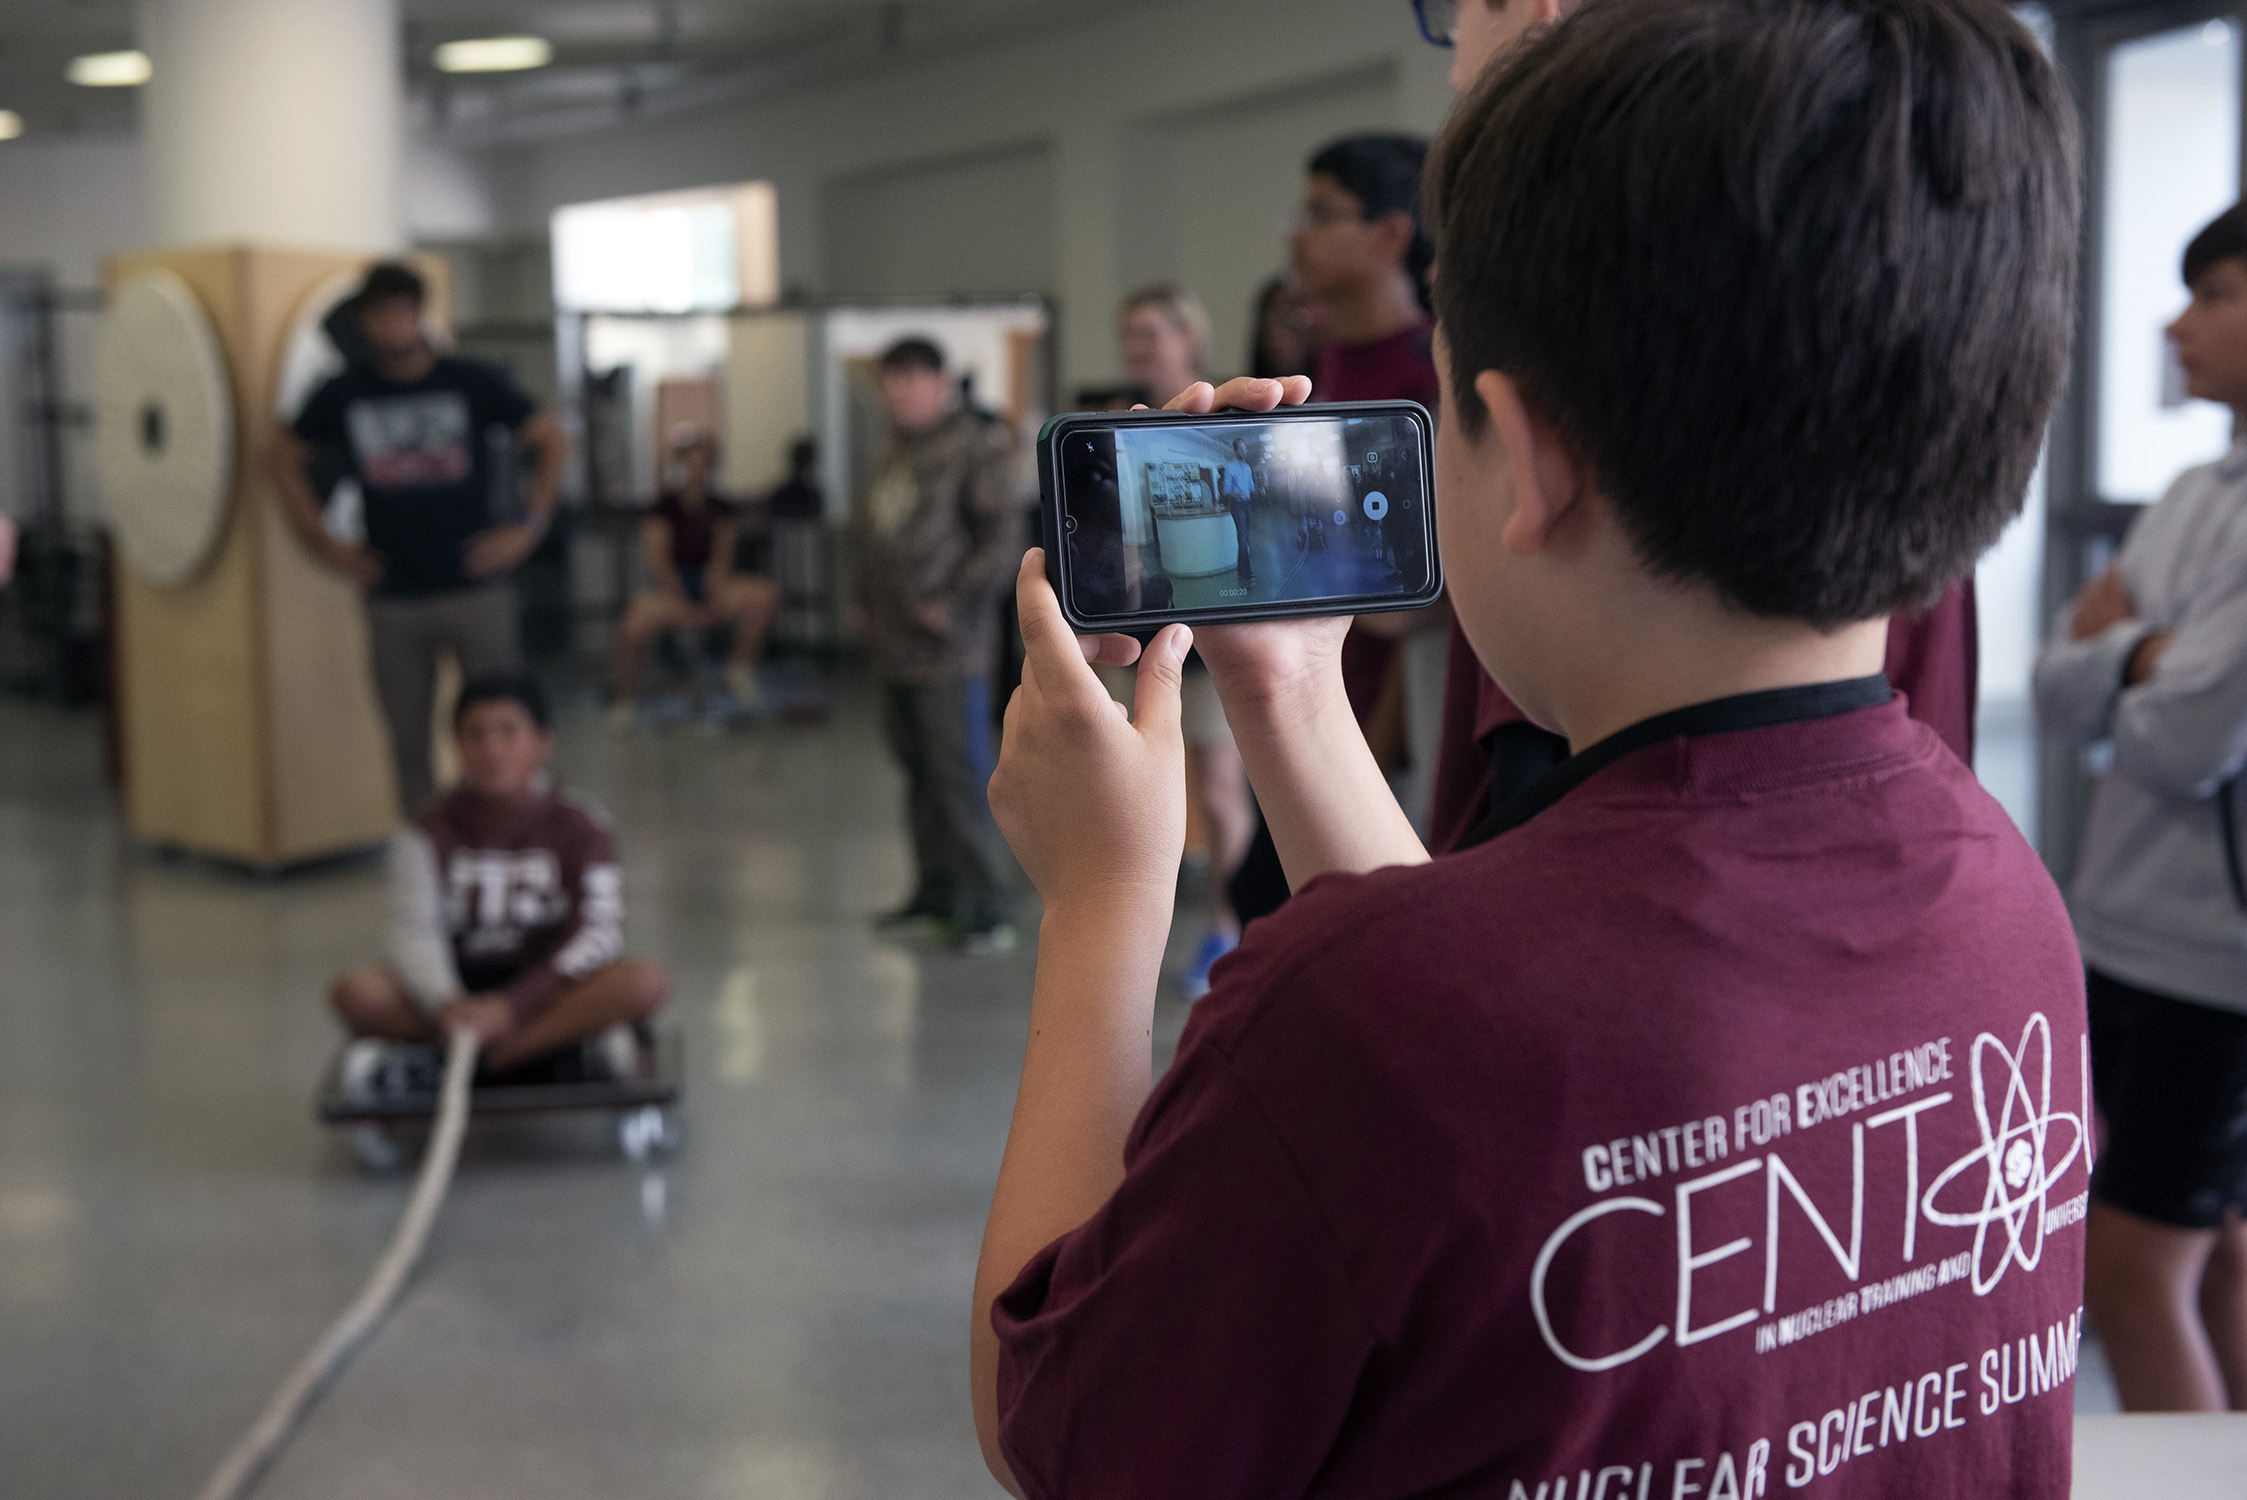 Middle school students wearing maroon CENTAUR t-shirts participate in hands-on science demonstrations during a nuclear science summer camp at Texas A&amp;M University